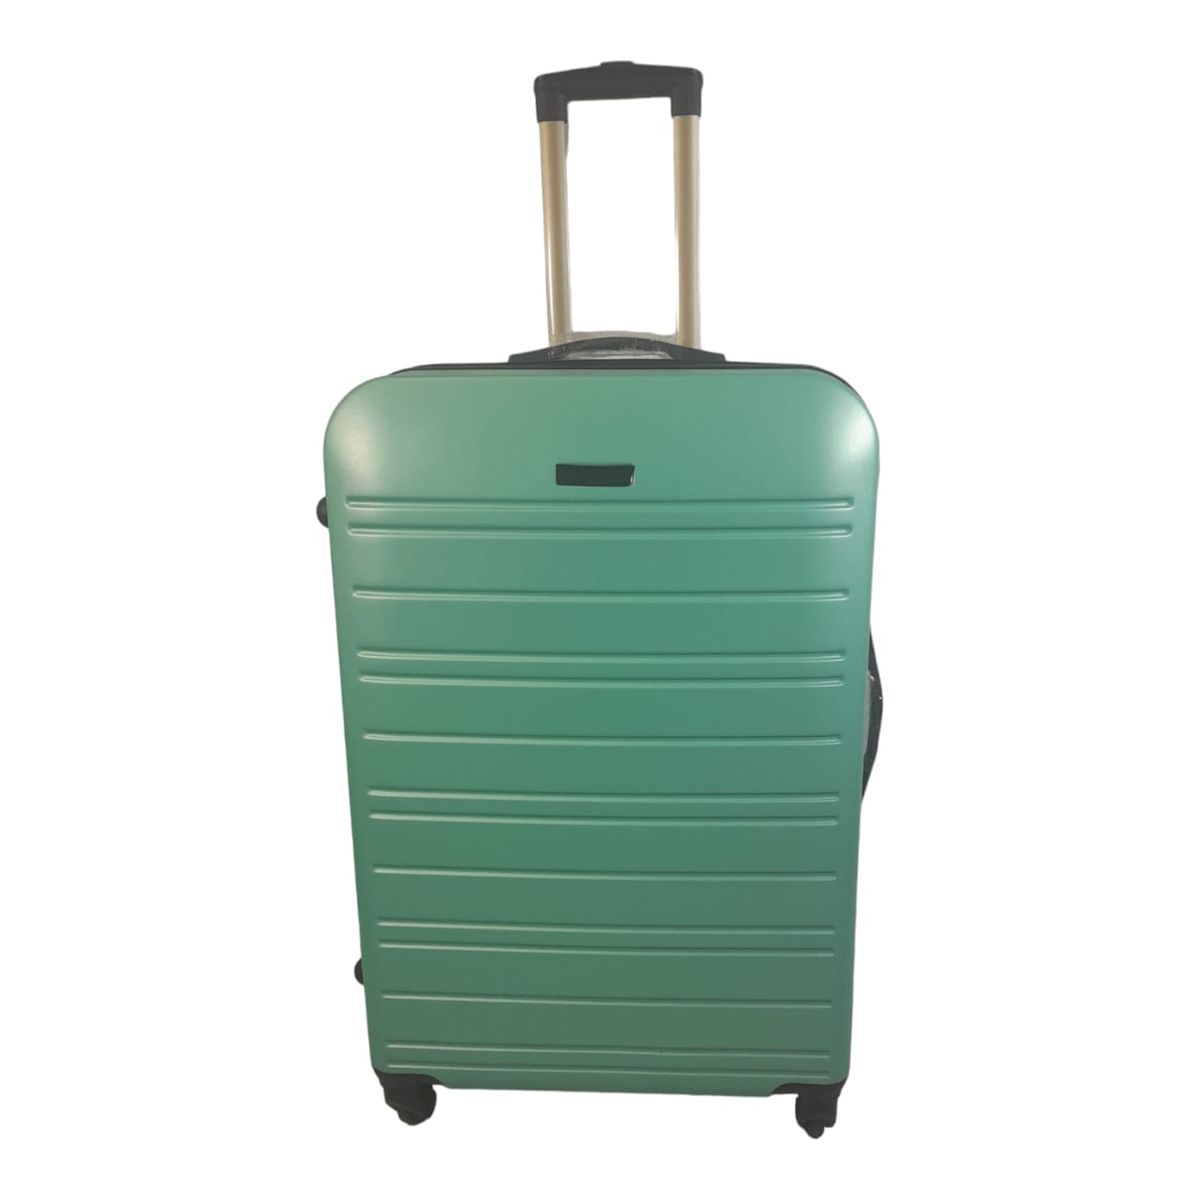 SMTE Luggage Suitcase - 23 inch - 1 Piece - Apple Green